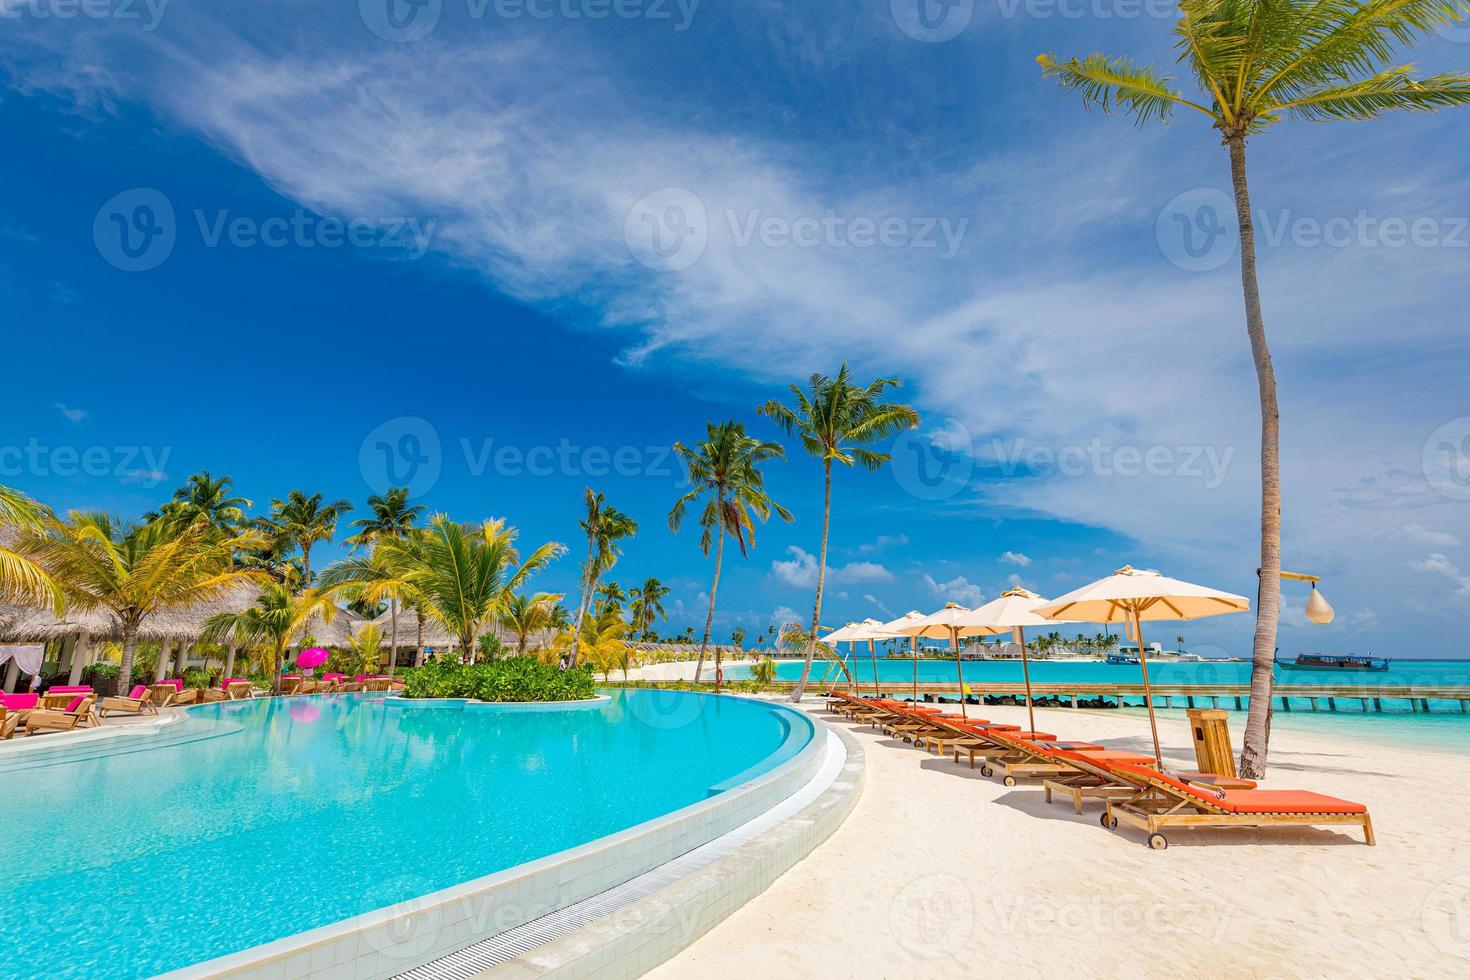 Outdoor tourism landscape. Luxurious beach resort with swimming pool and beach chairs or loungers under umbrellas with palm trees and blue sky. Summer travel and vacation background concept photo